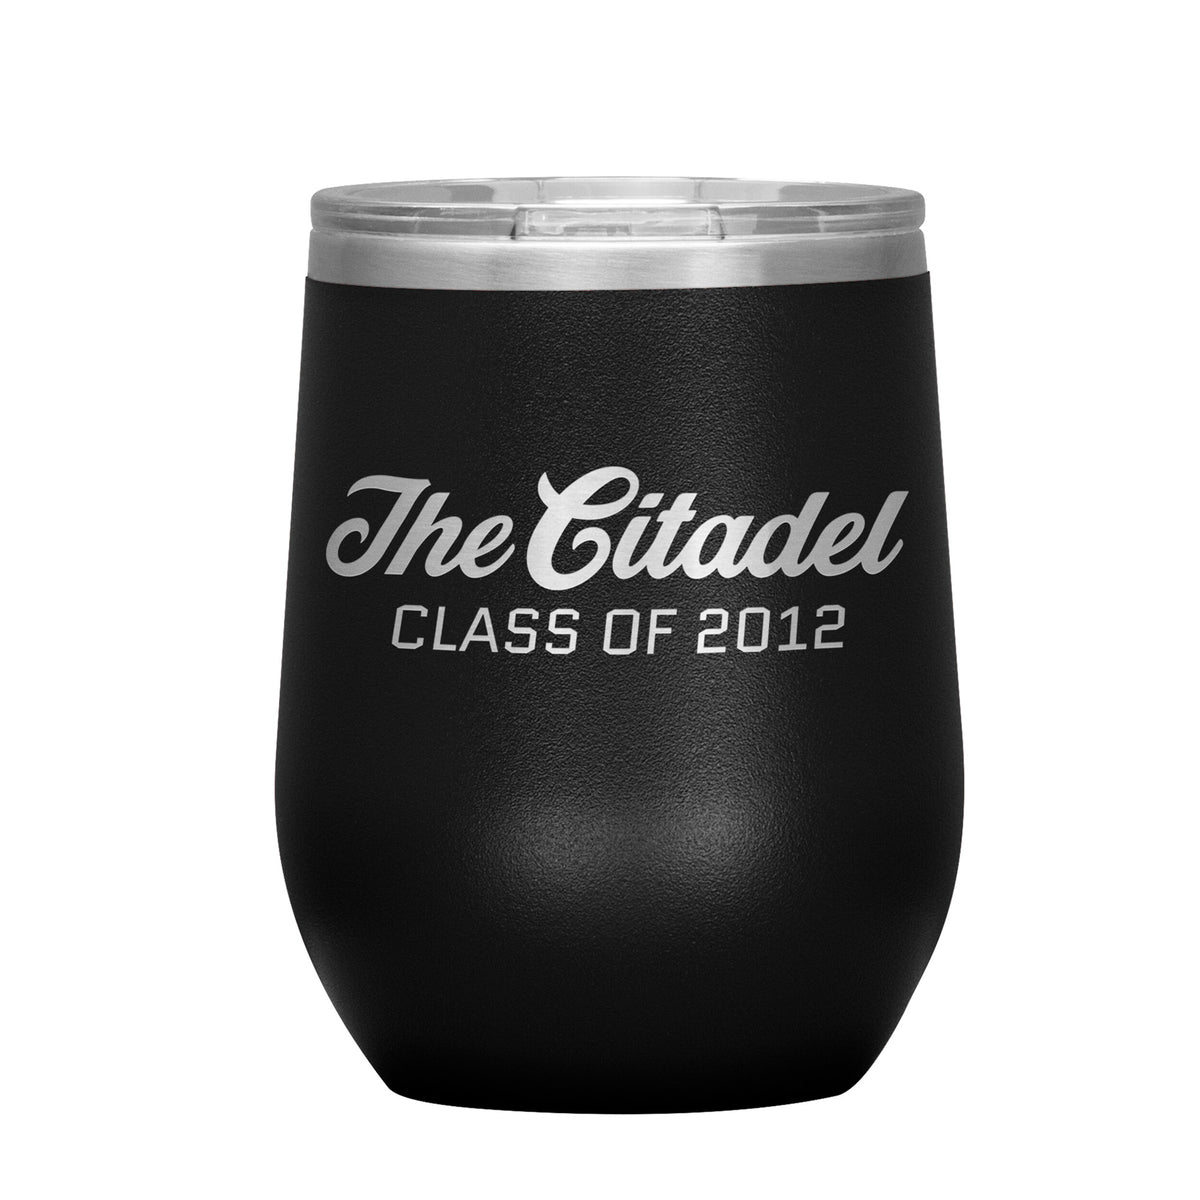 The Citadel Class of 2012 Wine Insulated Tumbler - 12 oz